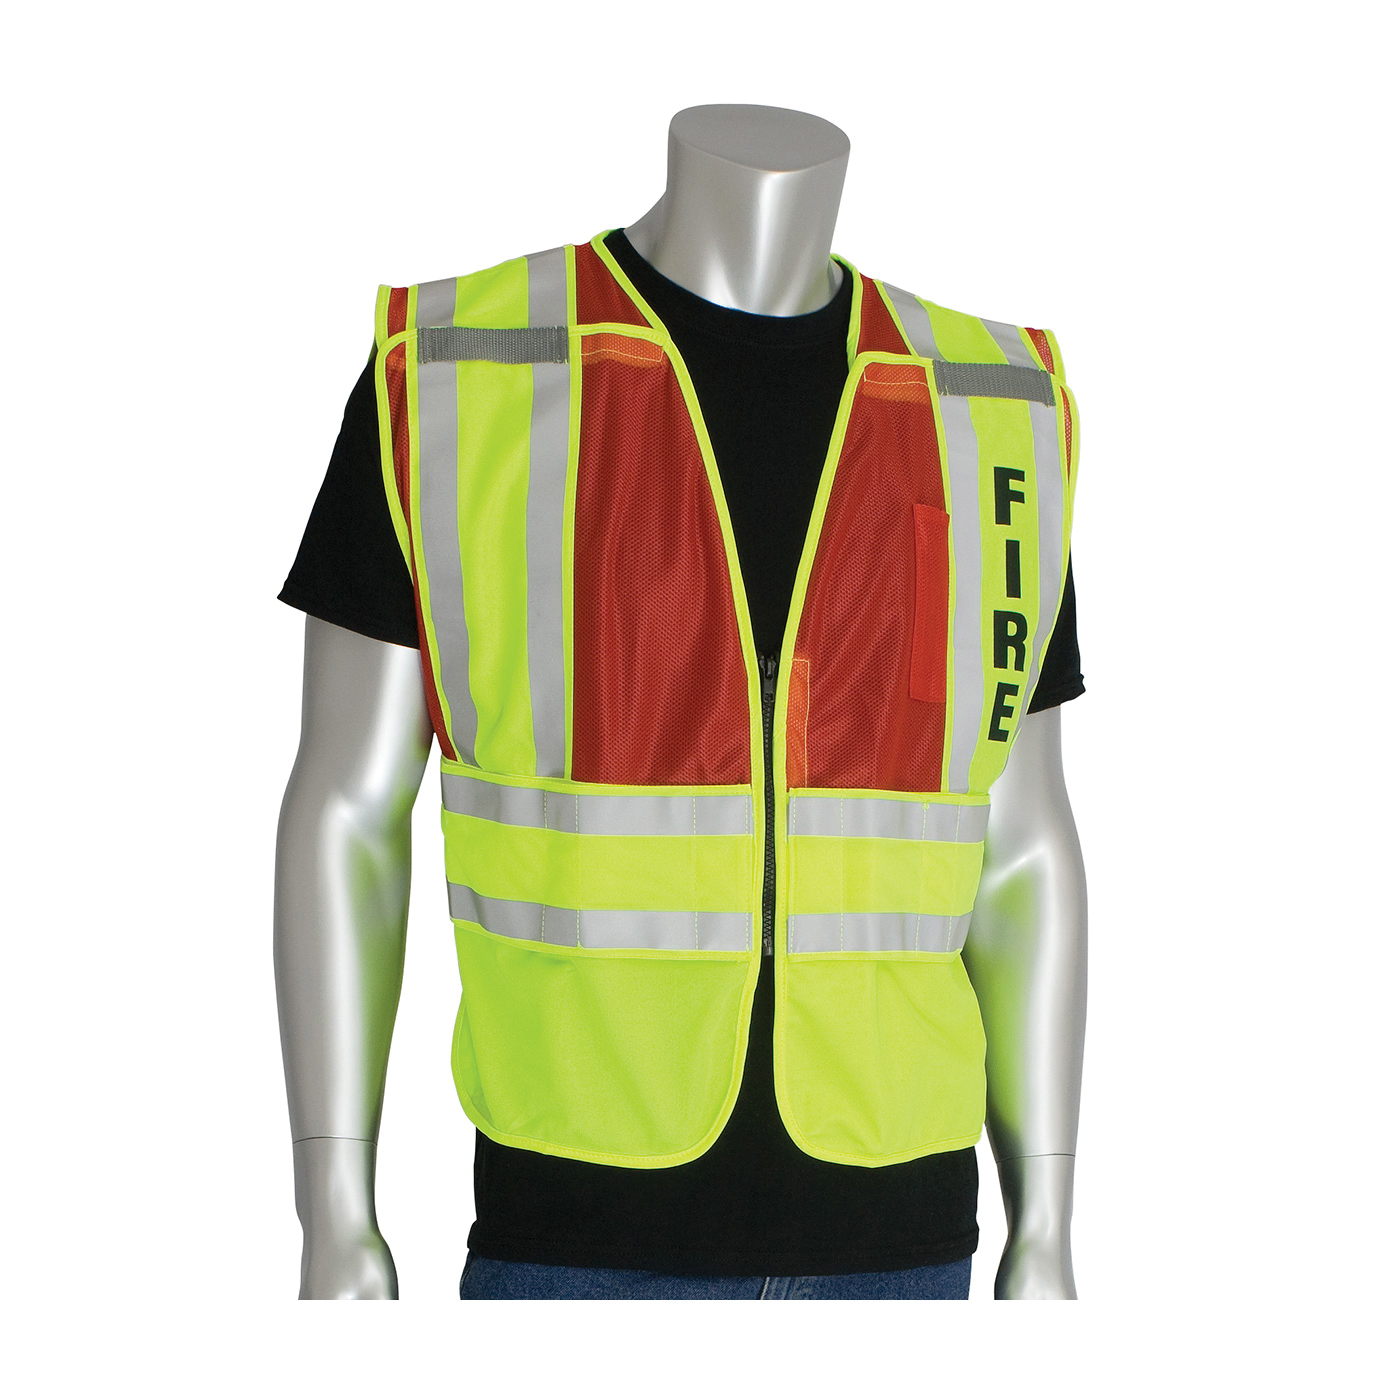 PIP® 302-PSV-RED-2X/5X Public Safety Vest With FIRE Logo, 2XL/5XL, Hi-Viz Lime Yellow/Red, Polyester, Zipper Closure, 2 Pockets, ANSI Class: Class 2, Specifications Met: ANSI 107 Type P